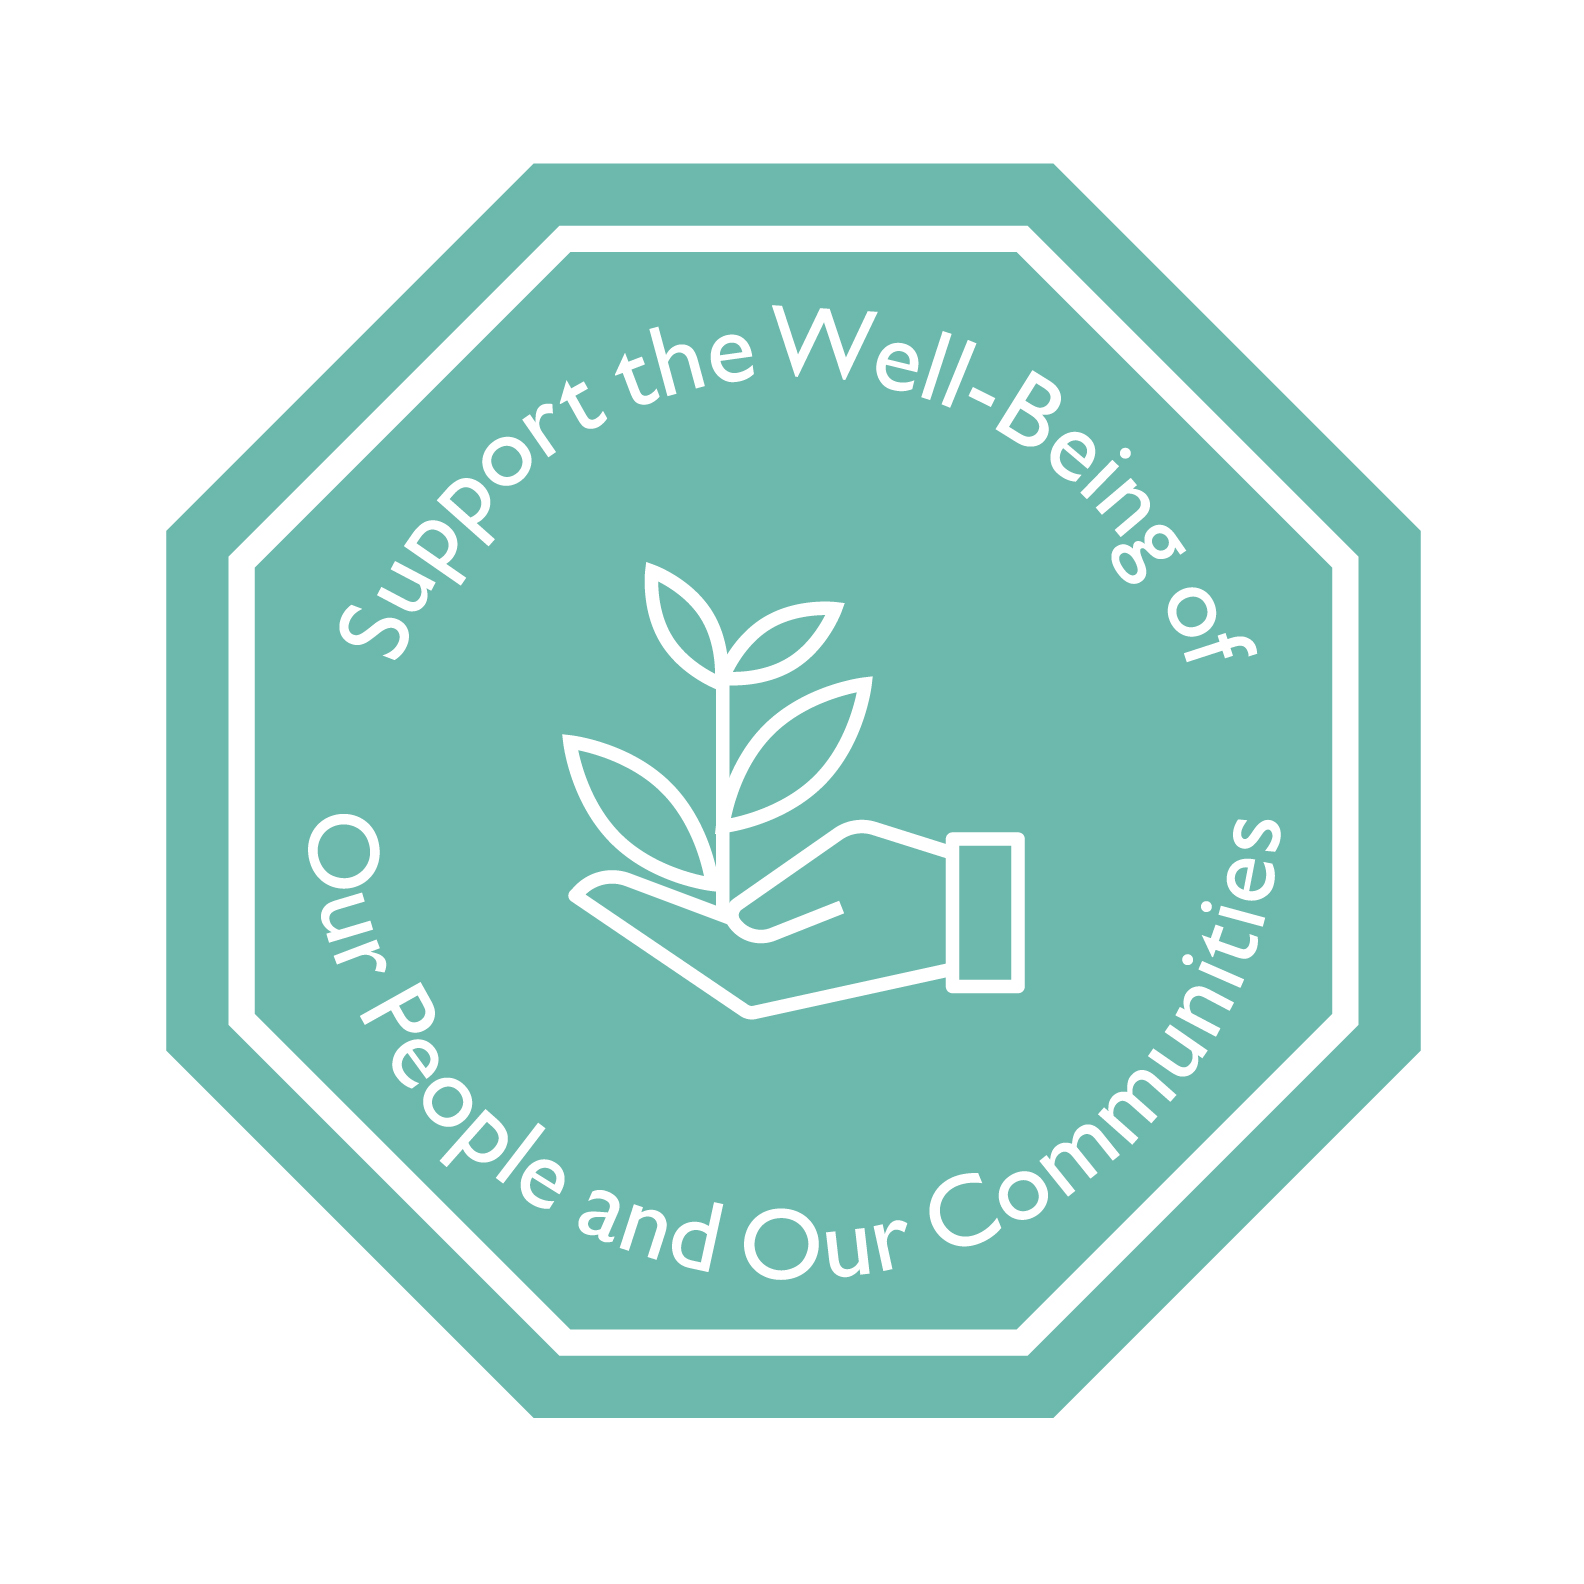 support well being of people and communities